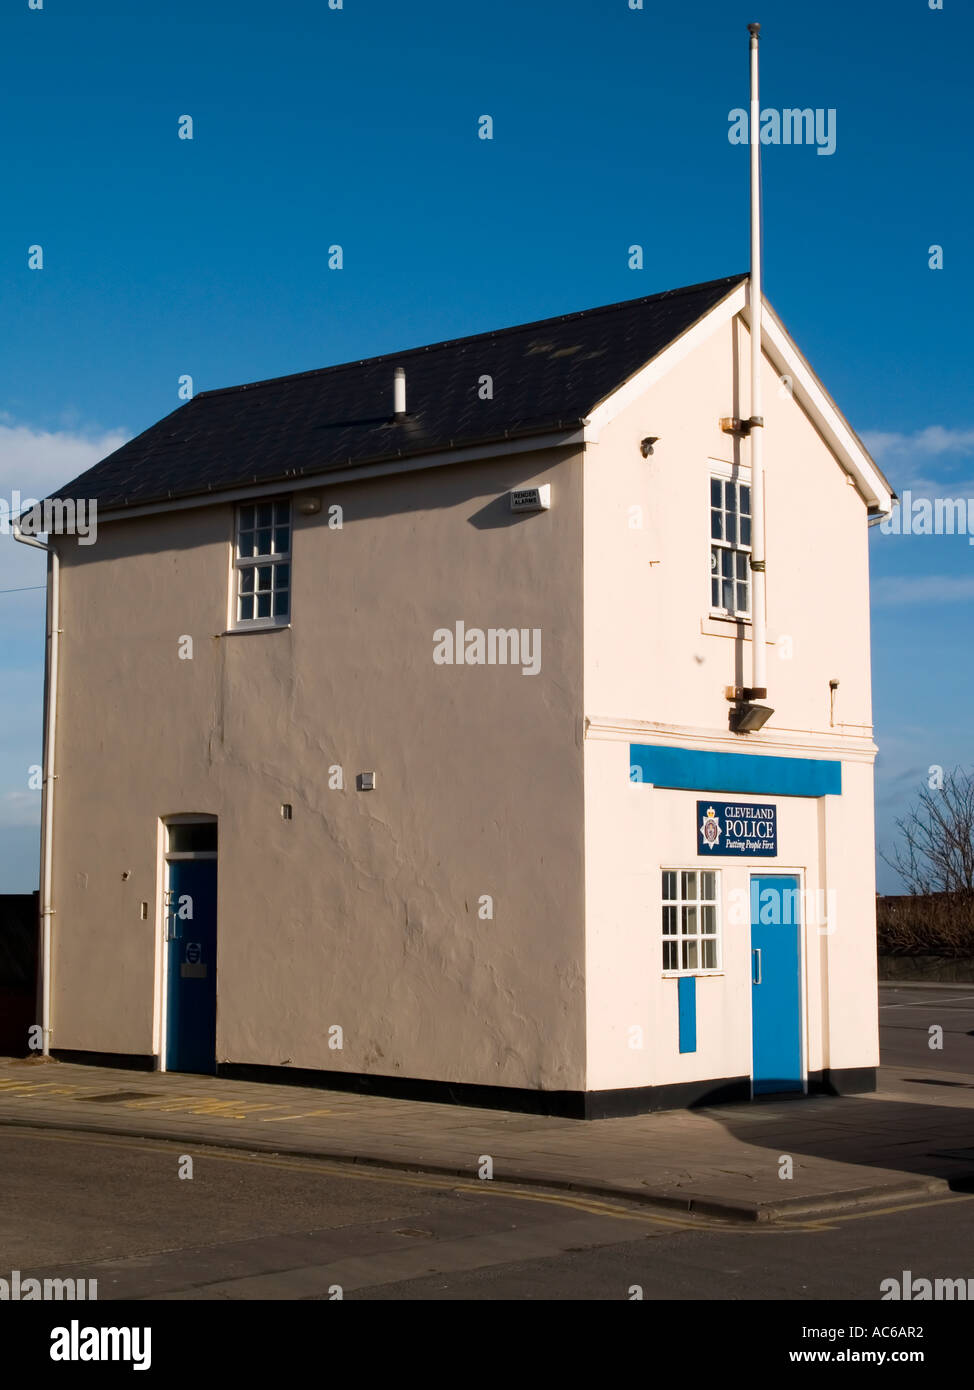 A small police station overlooking the beach at the seaside town of Seaton Carew, Cleveland UK Stock Photo